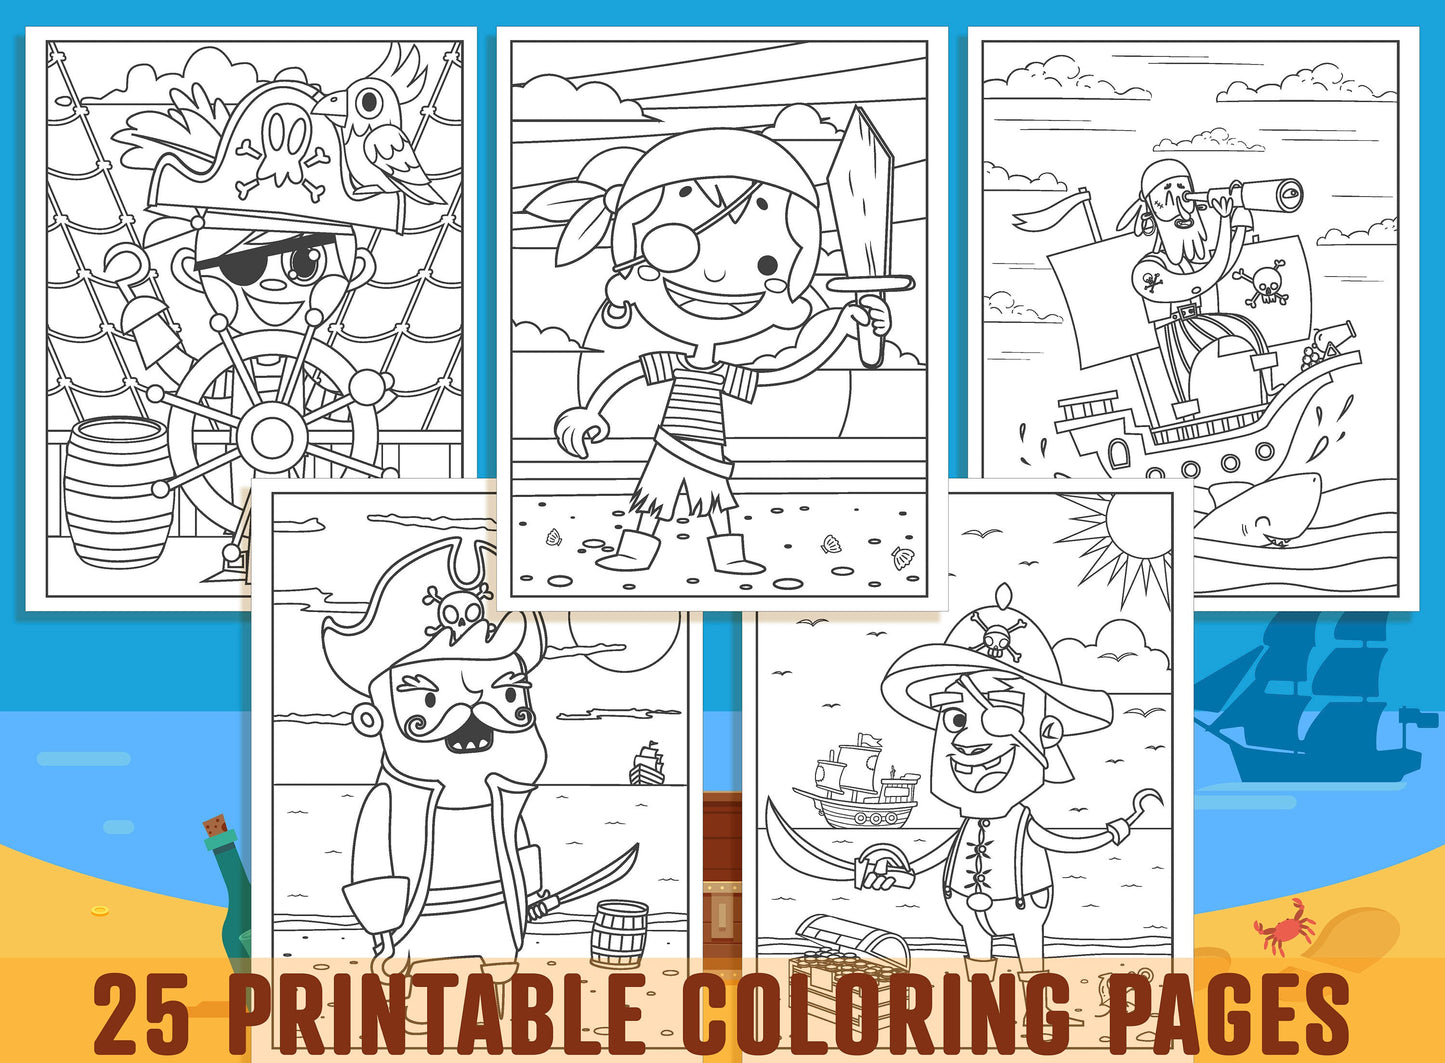 Pirate Coloring Pages - 25 Printable Pirate Coloring Pages for Kids, Boys, Girls, Teens. Pirate/Birthday Party Activity - Instant Download.